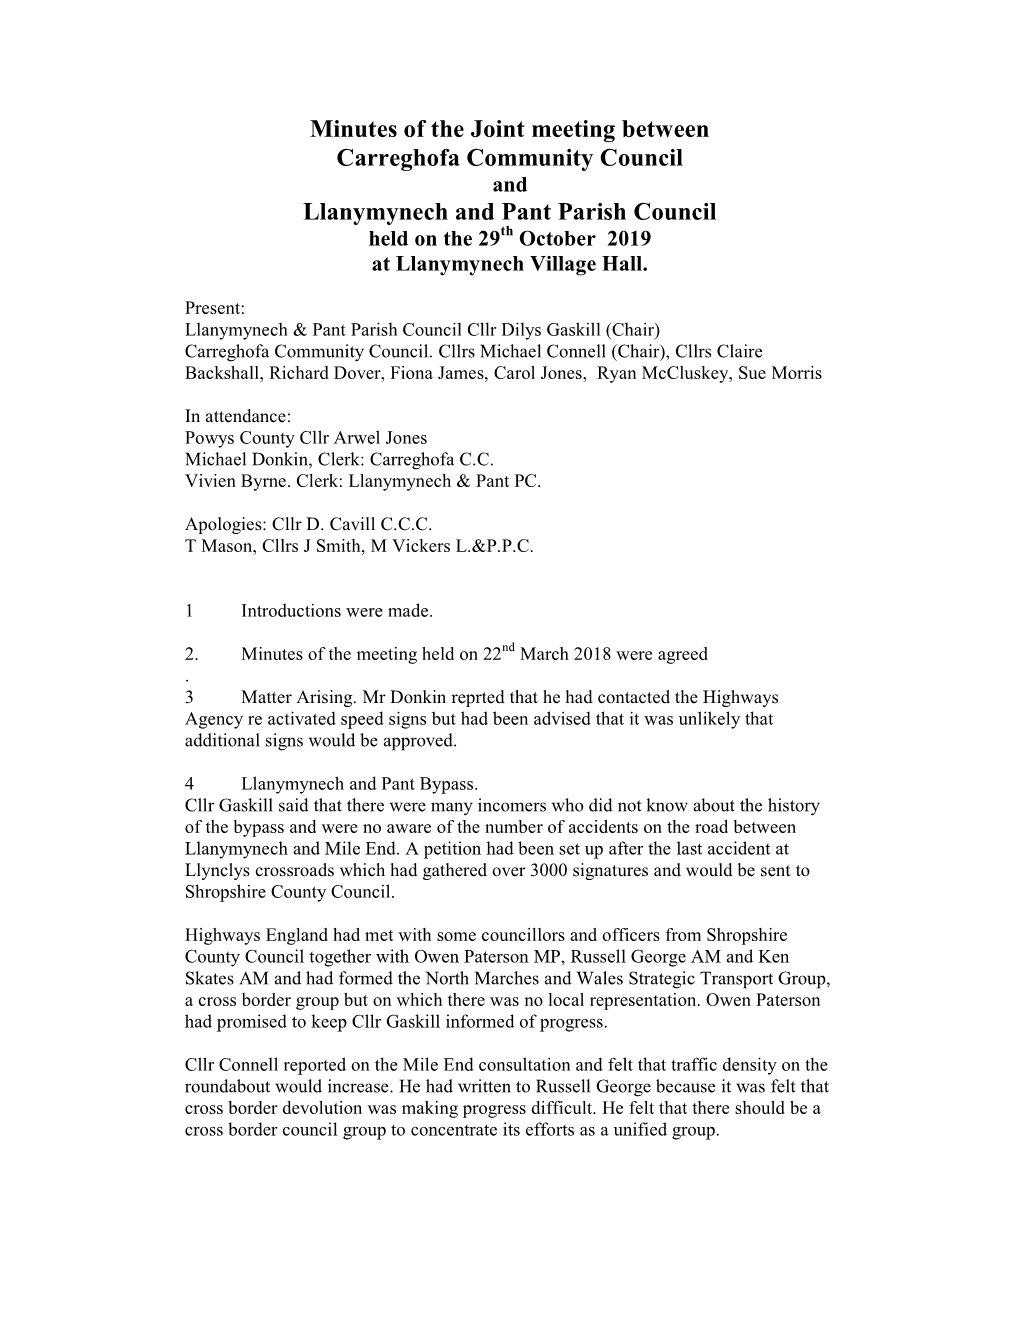 Minutes of the Joint Meeting Between Carreghofa Community Council and Llanymynech and Pant Parish Council Held on the 29Th October 2019 at Llanymynech Village Hall